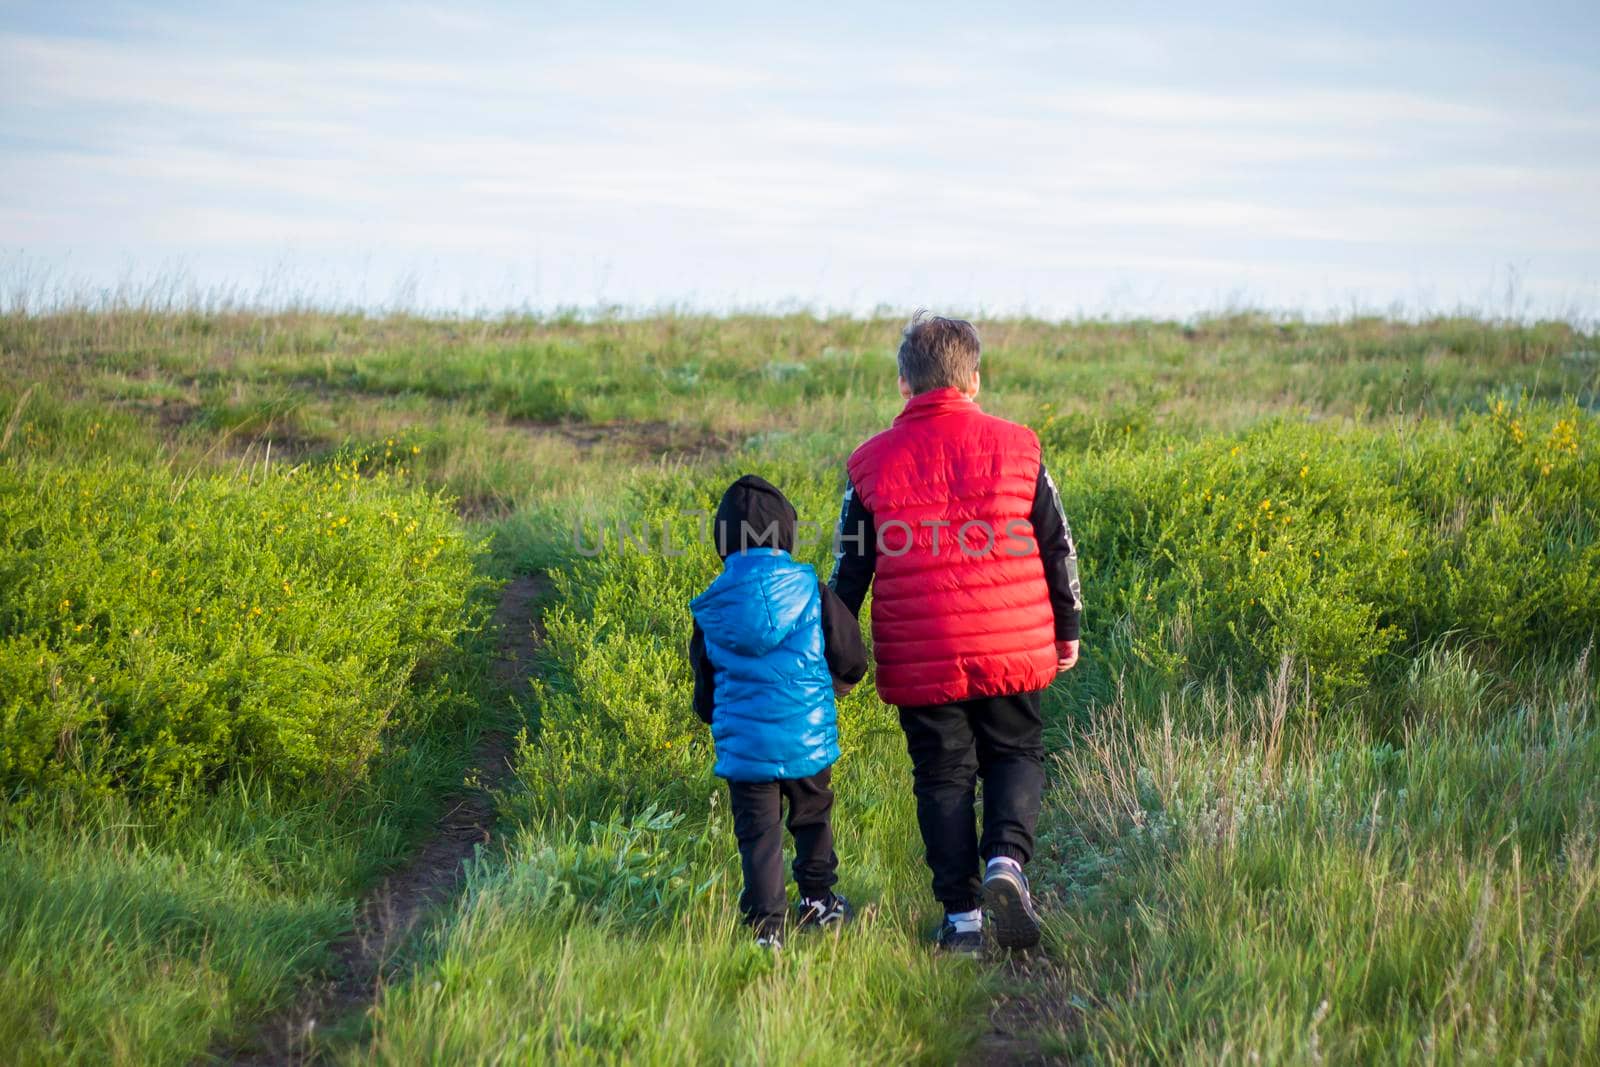 Children in the open spaces of the field are walking among the juicy spring grass in the light of sunset along a narrow trampled path. Landscape, countryside, spring